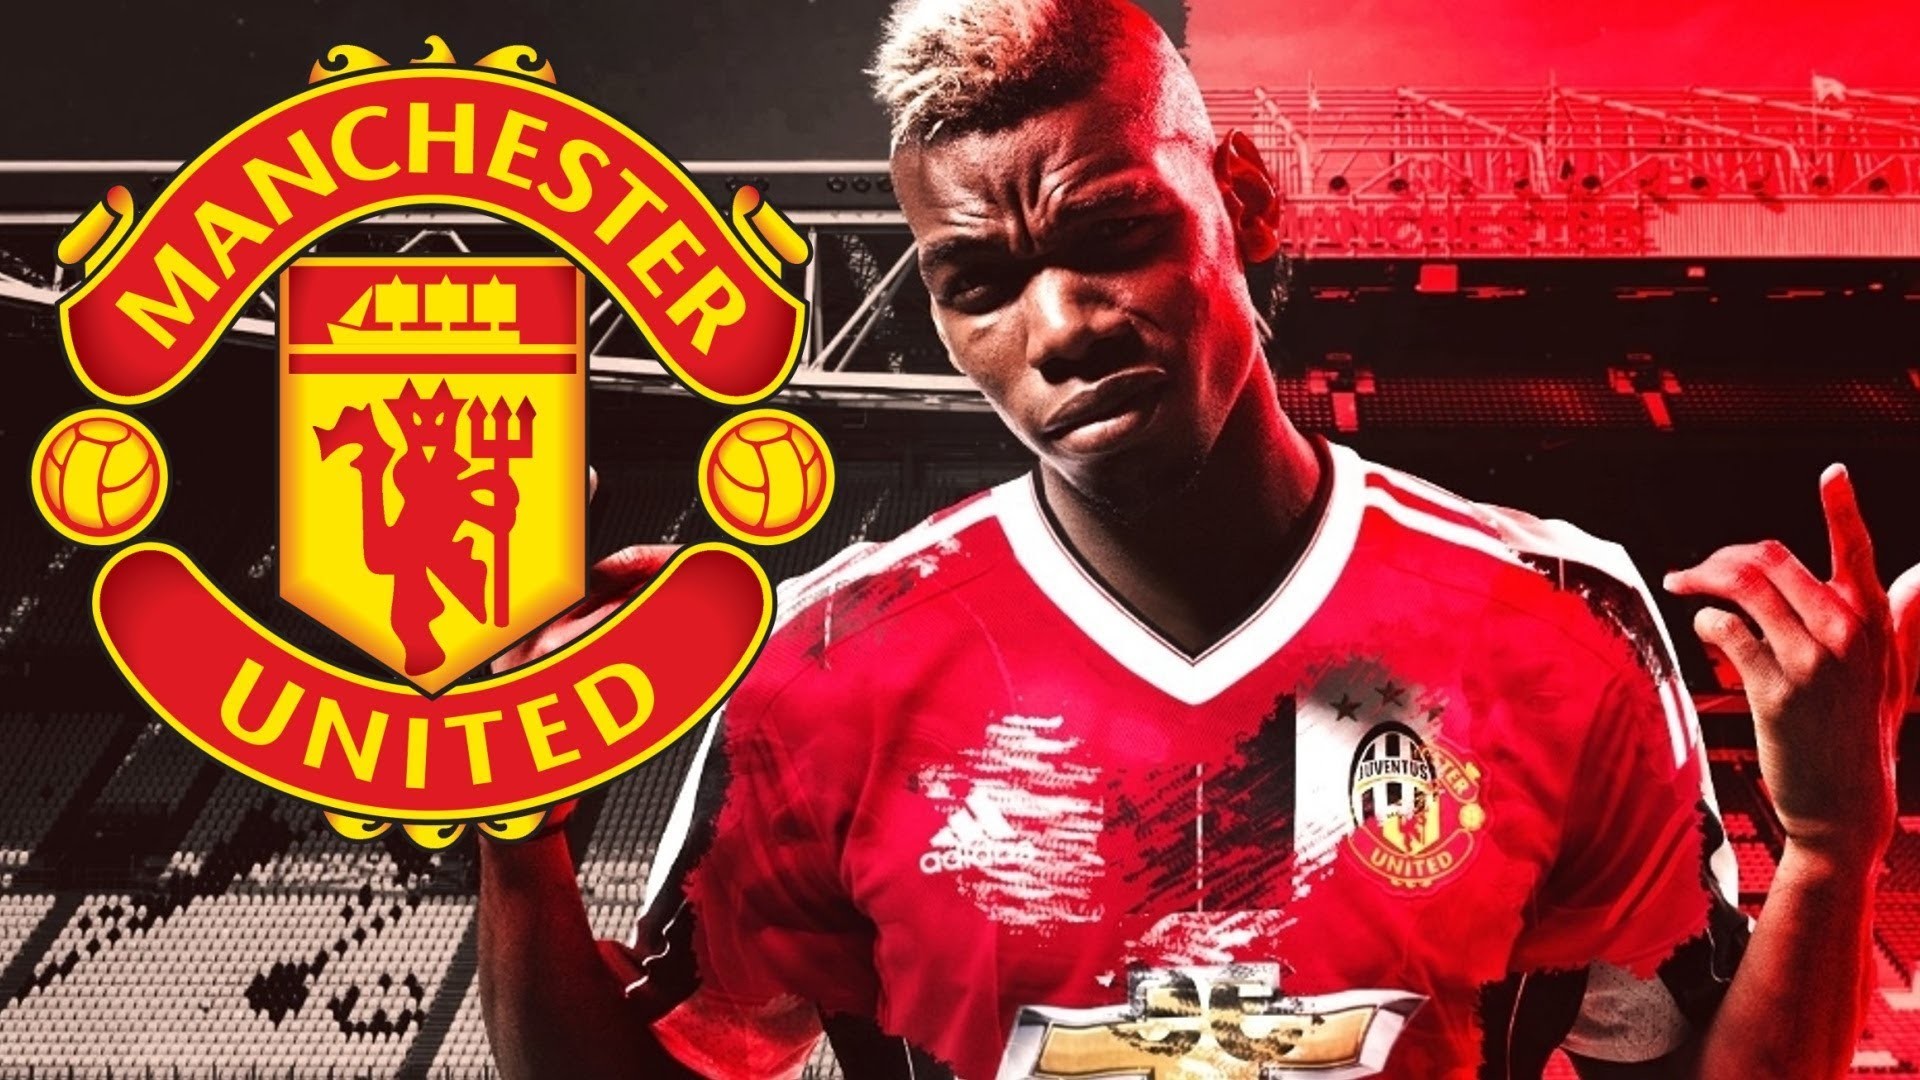 Paul Pogba Manchester United Wallpapers (89+ images)